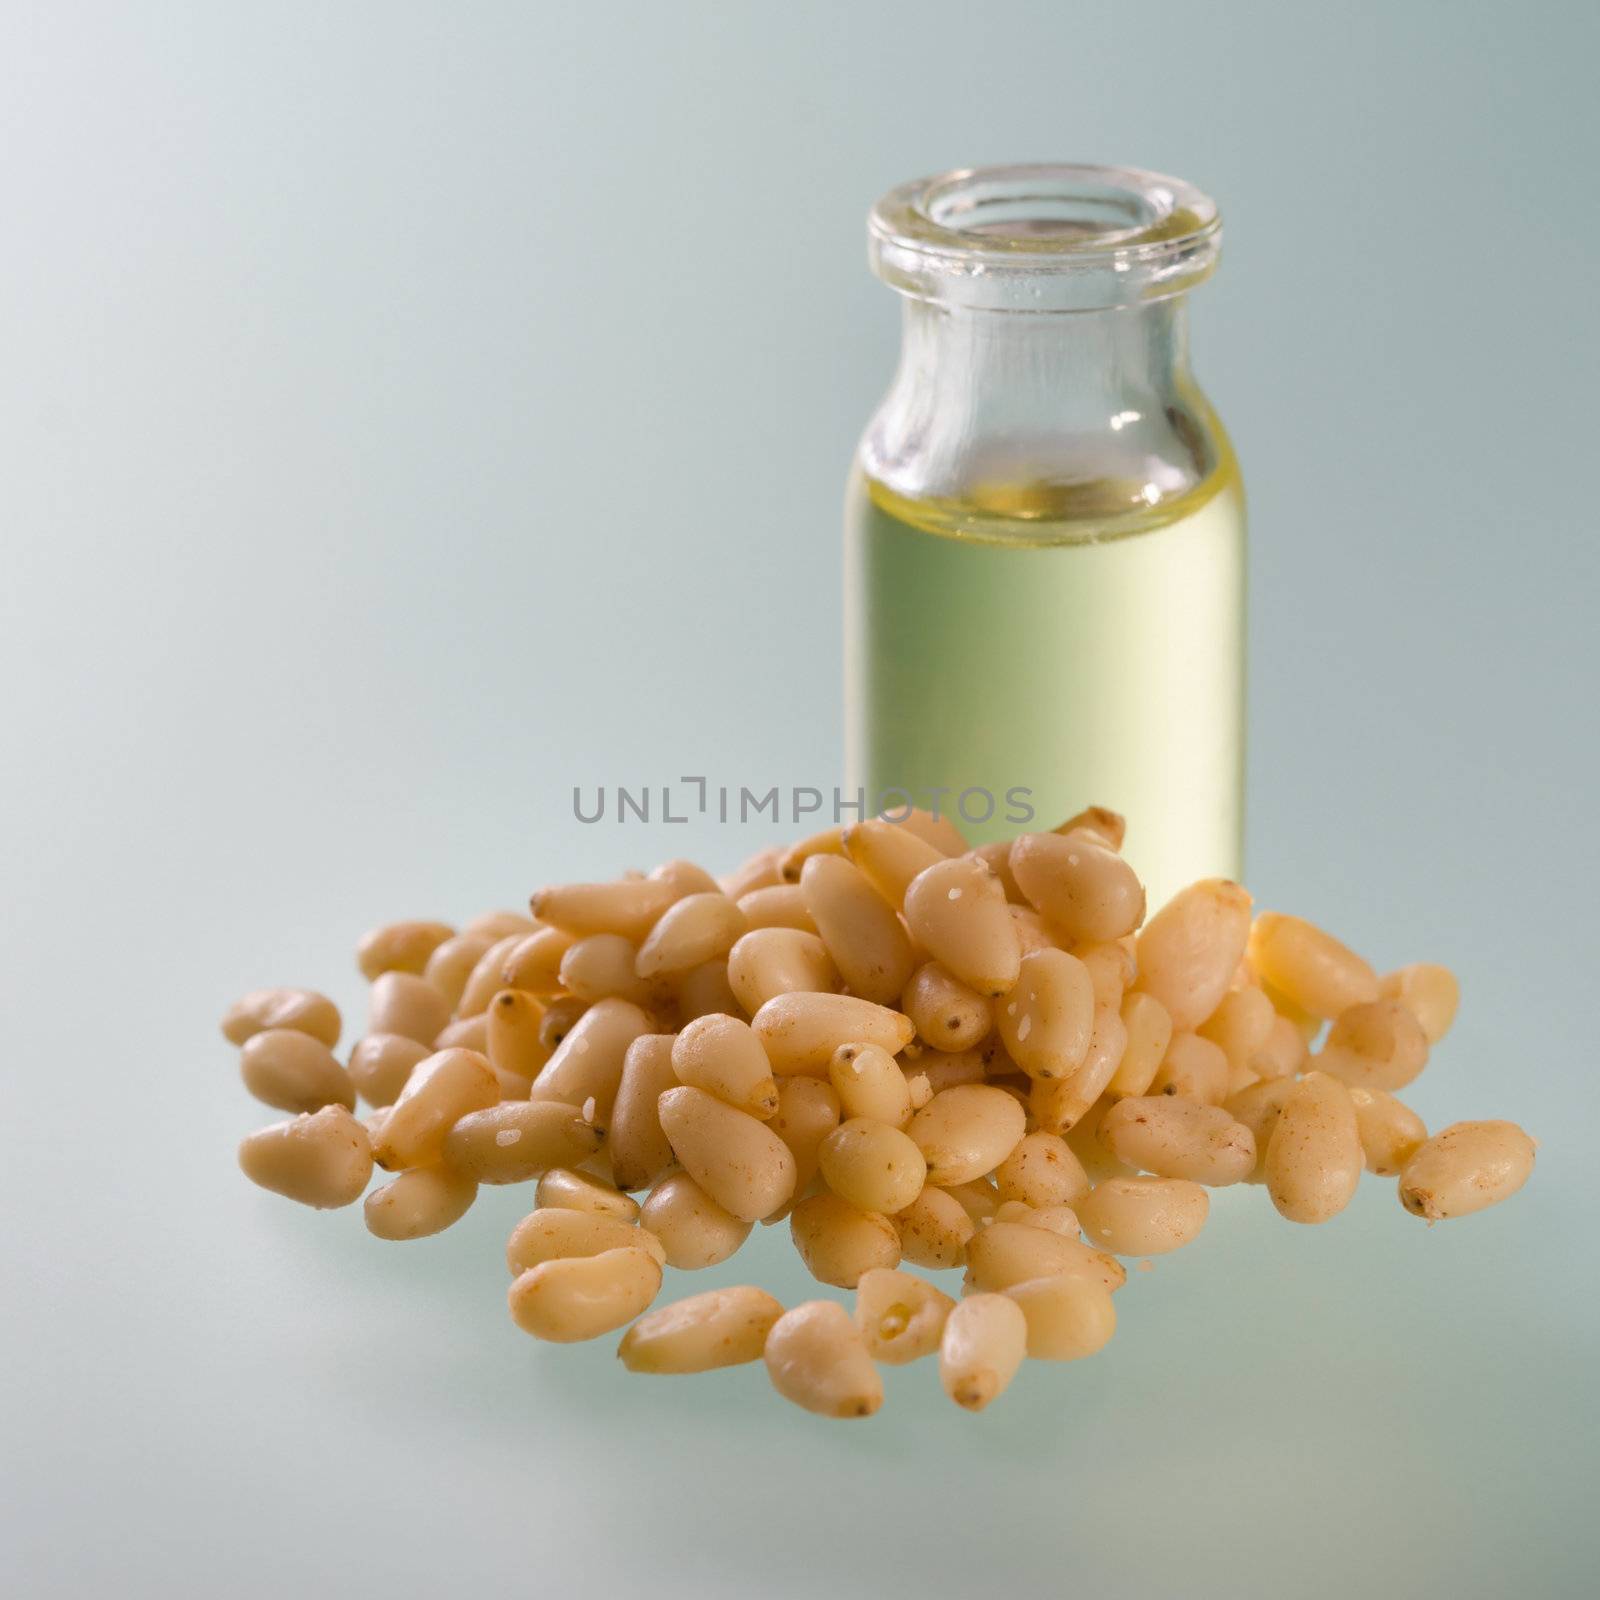 Open bottle of cedar oil and nuts on soft background